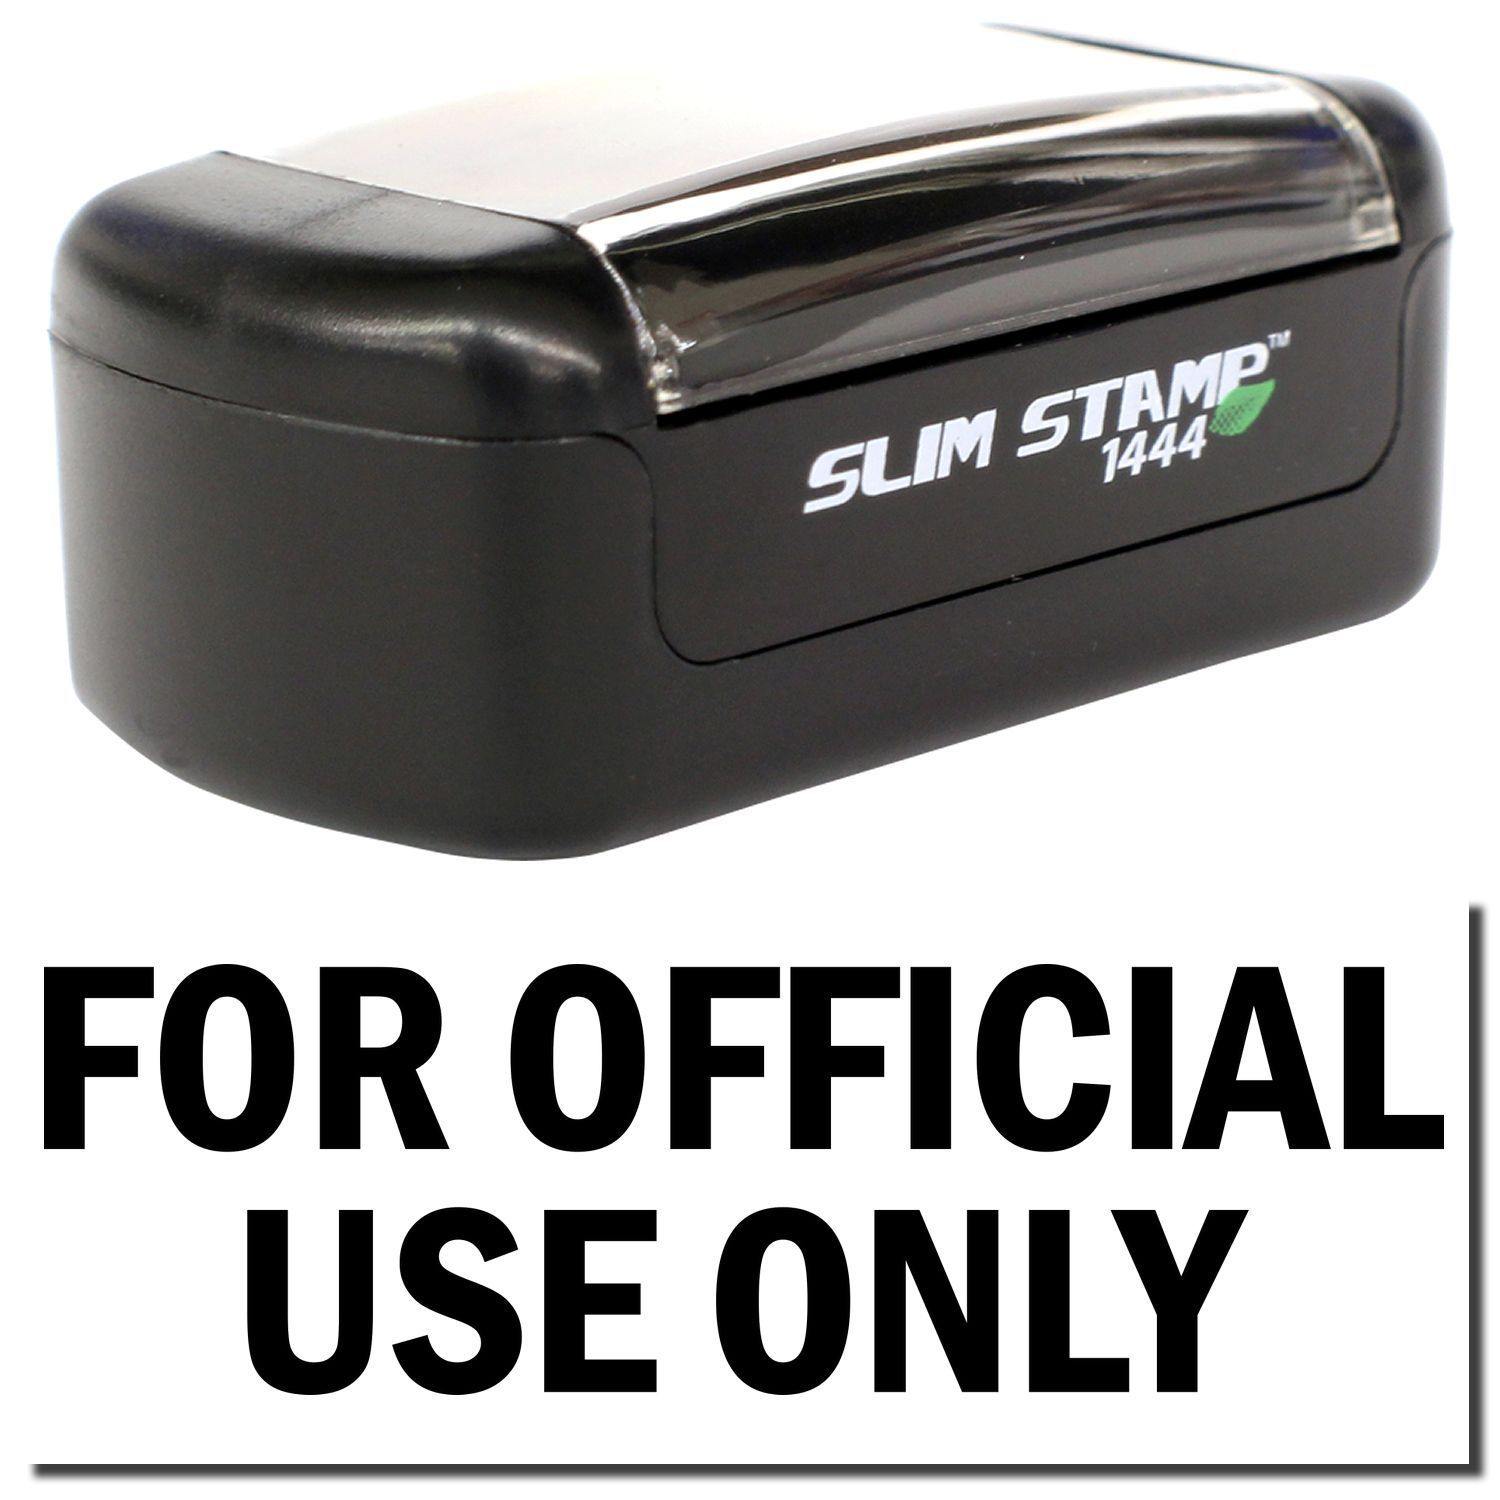 A stock office pre-inked stamp with a stamped image showing how the text "FOR OFFICIAL USE ONLY" is displayed after stamping.